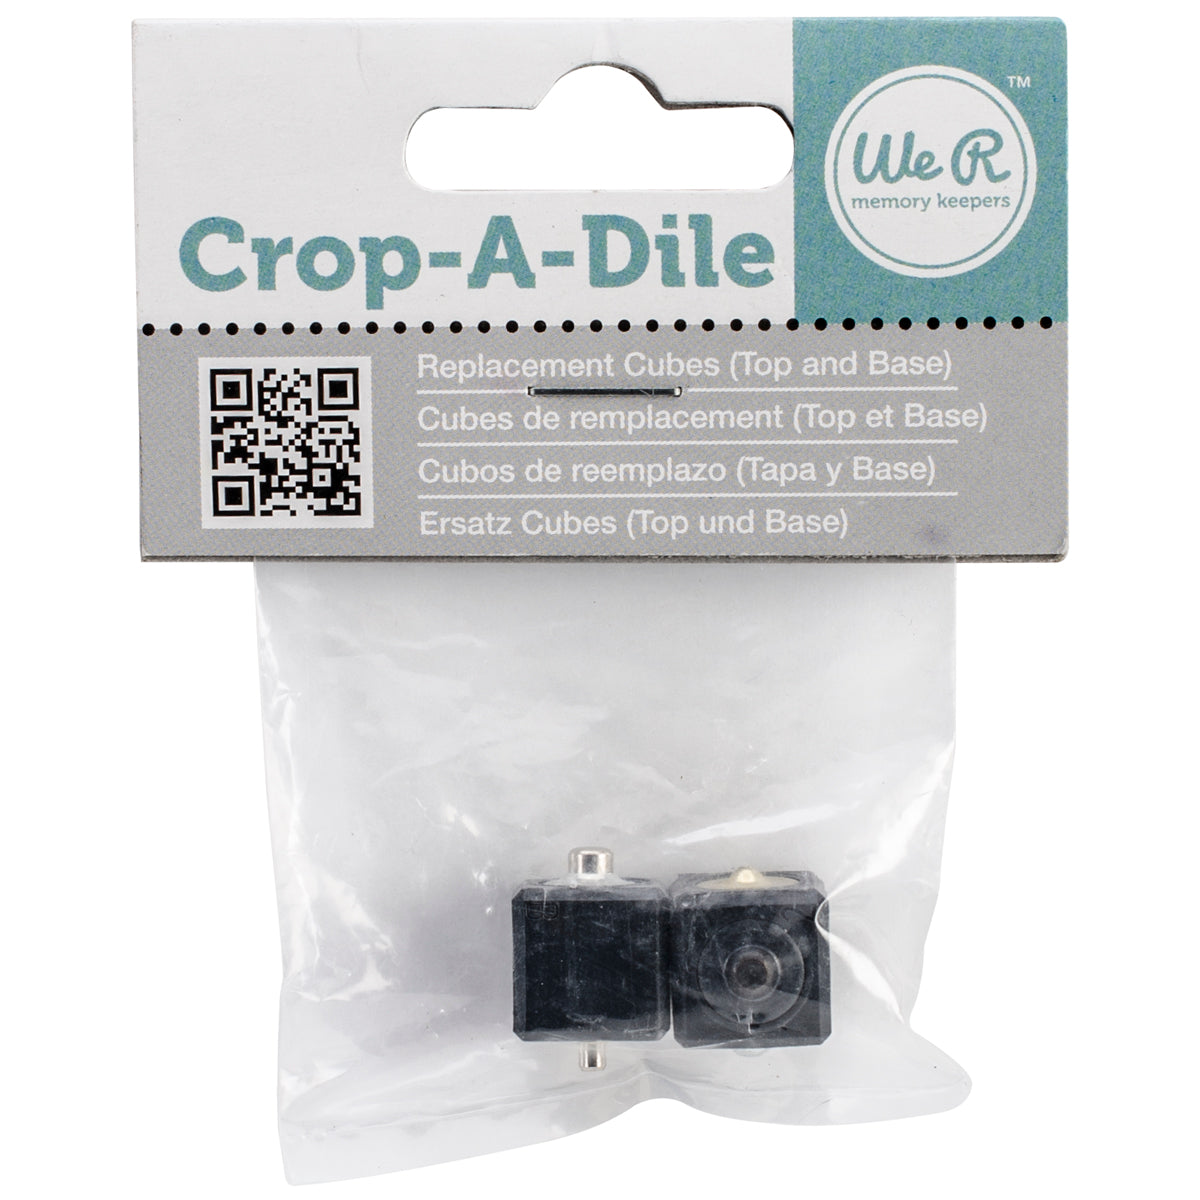 Crop-A-Dile Replacement Cubes-For 70907, WR660581, WR600580 & 6602484